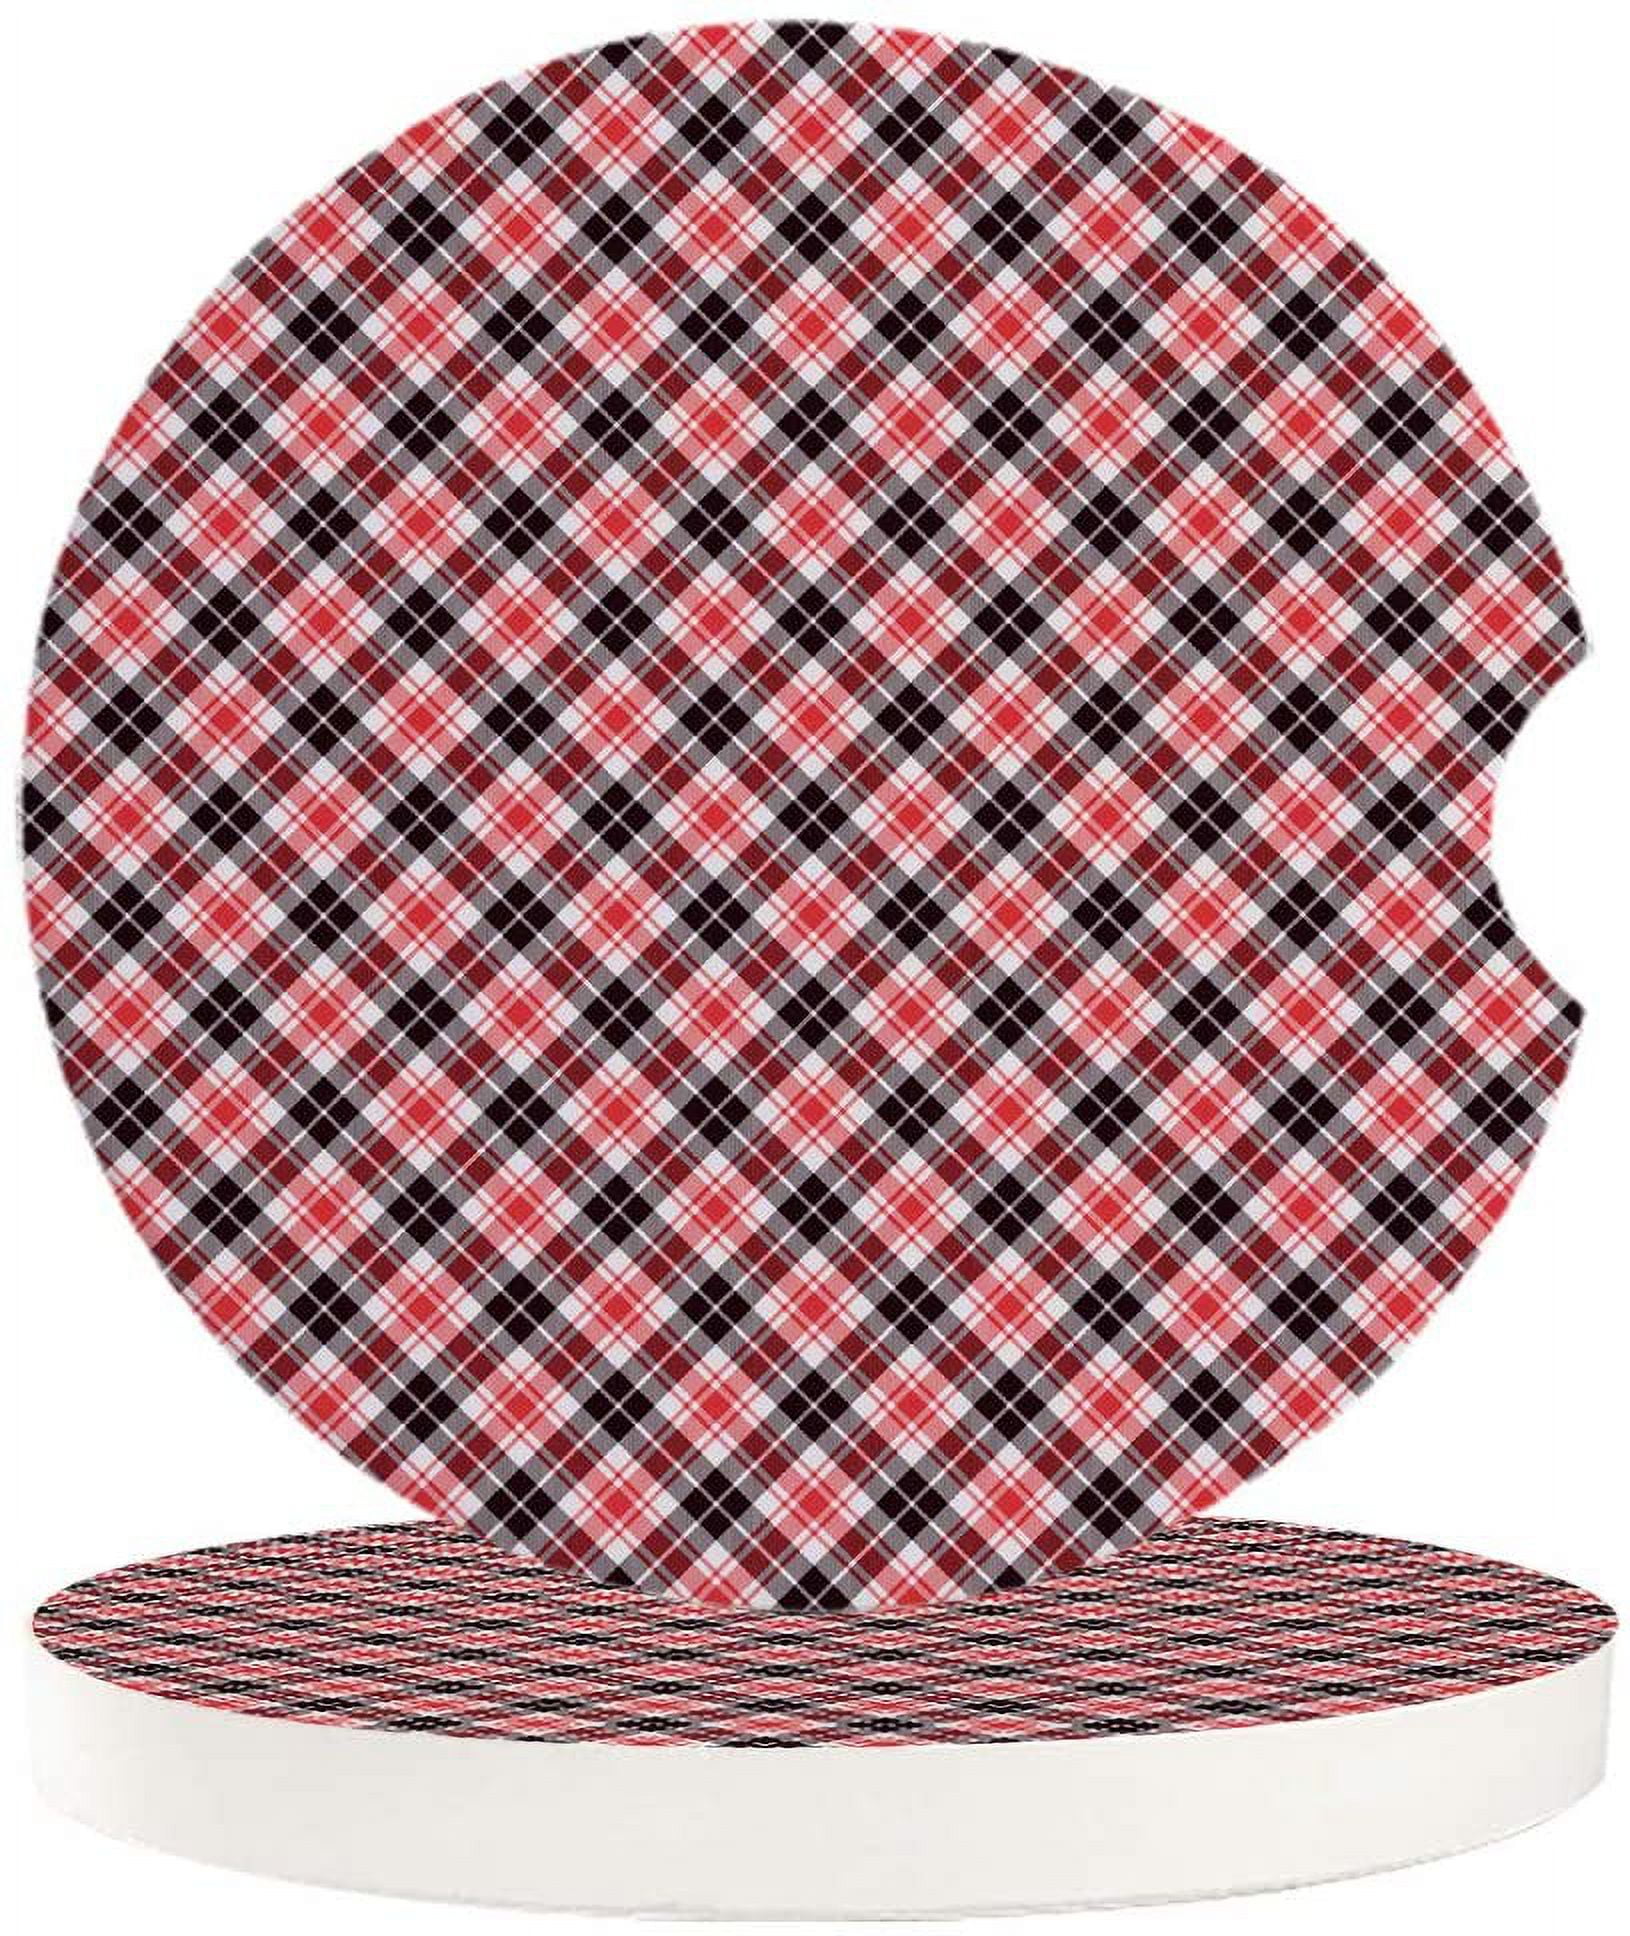 Car Coasters For Cup Holders Checkerboard Car Cup Mat Universal